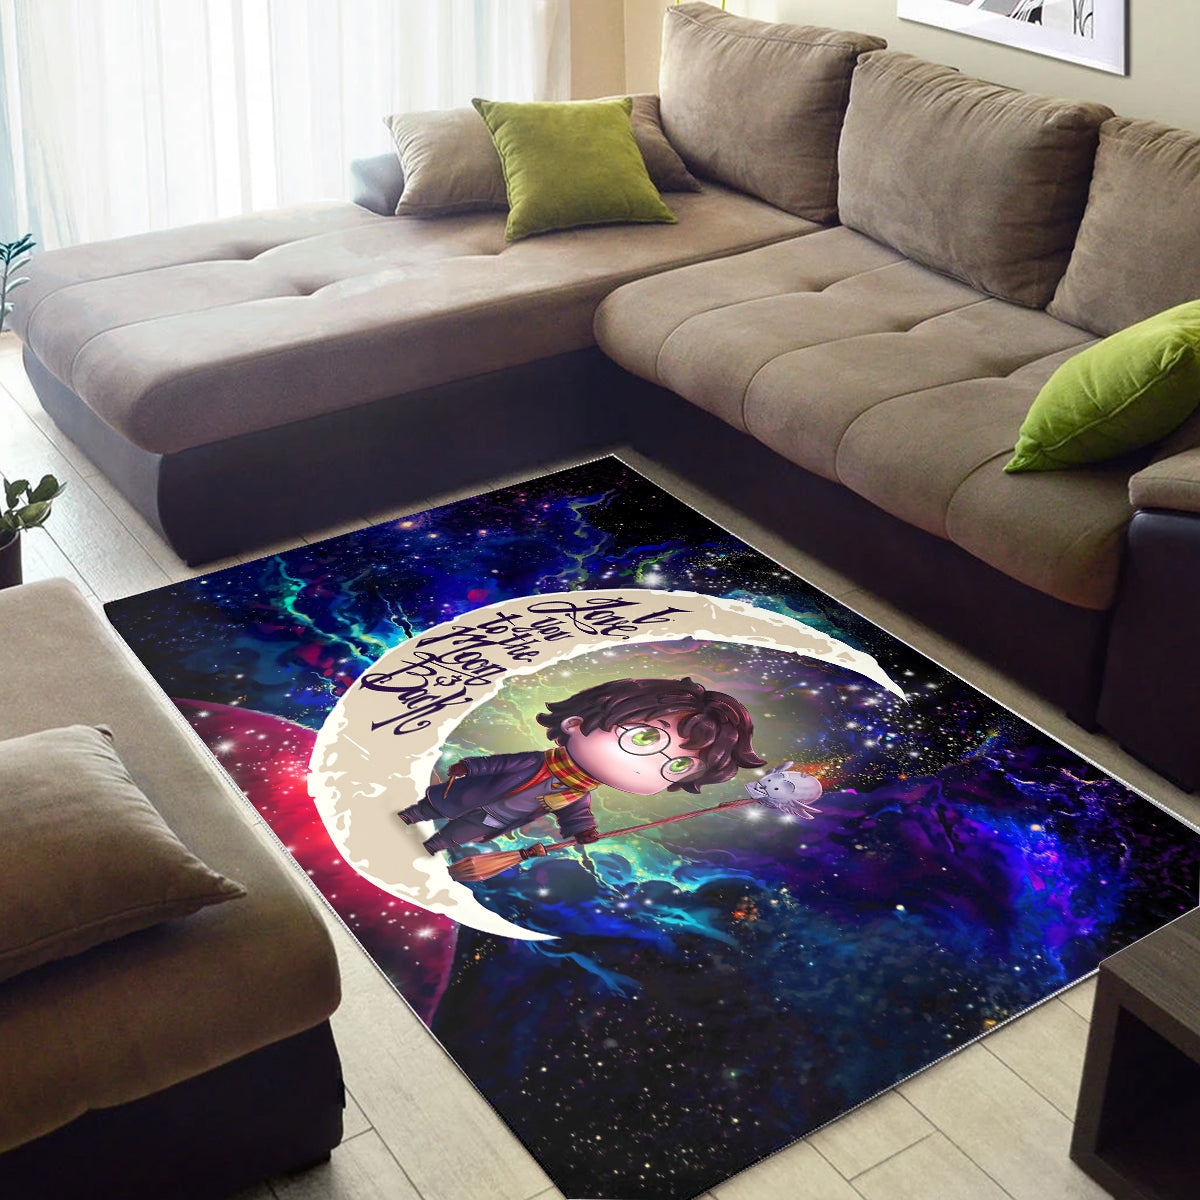 Harry Potter Chibi Love You To The Moon Galaxy Carpet Rug Home Room Decor